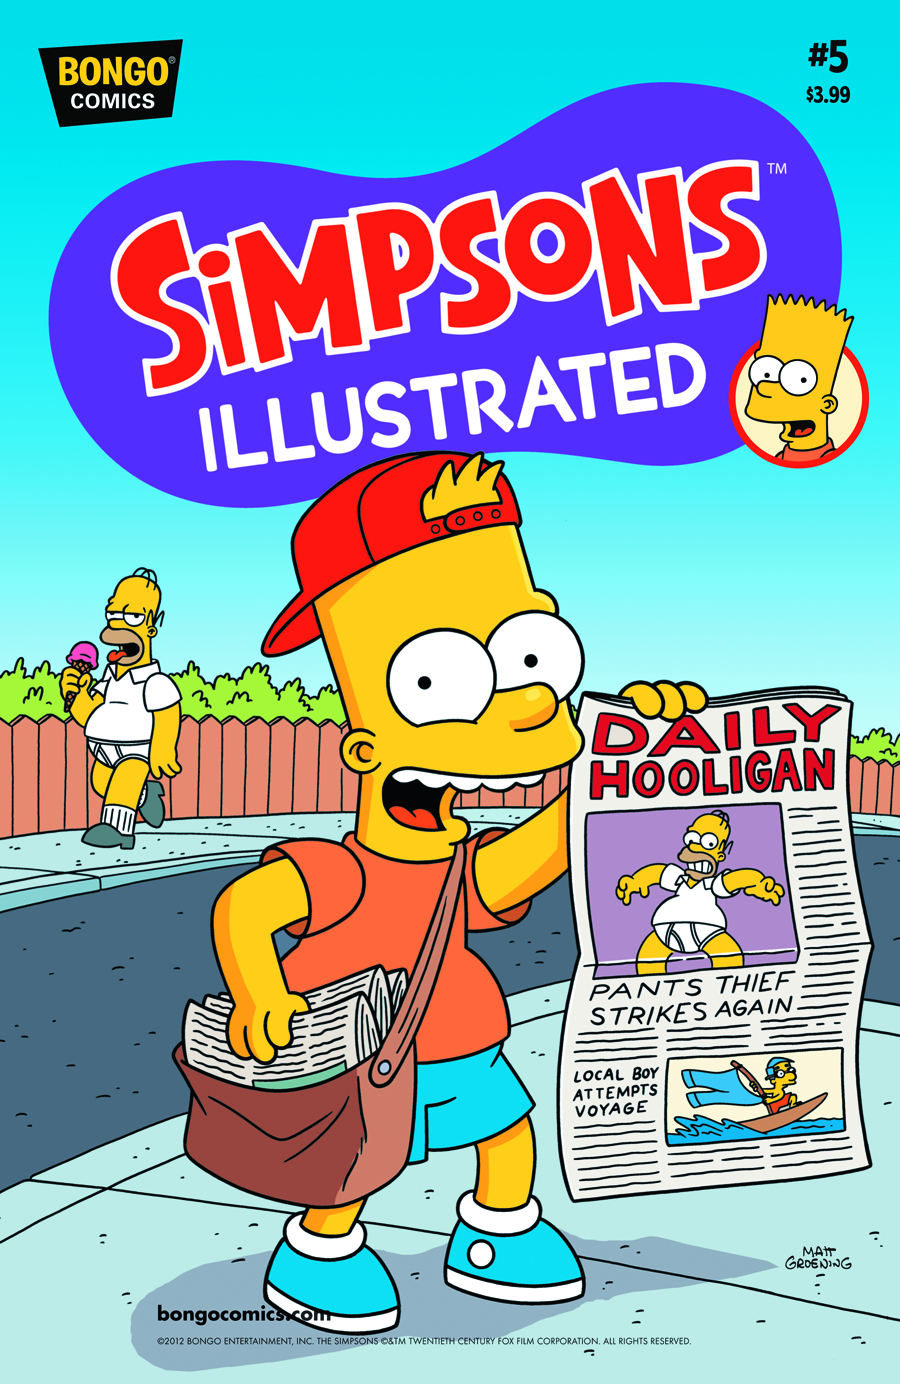 simpsons illustrated download